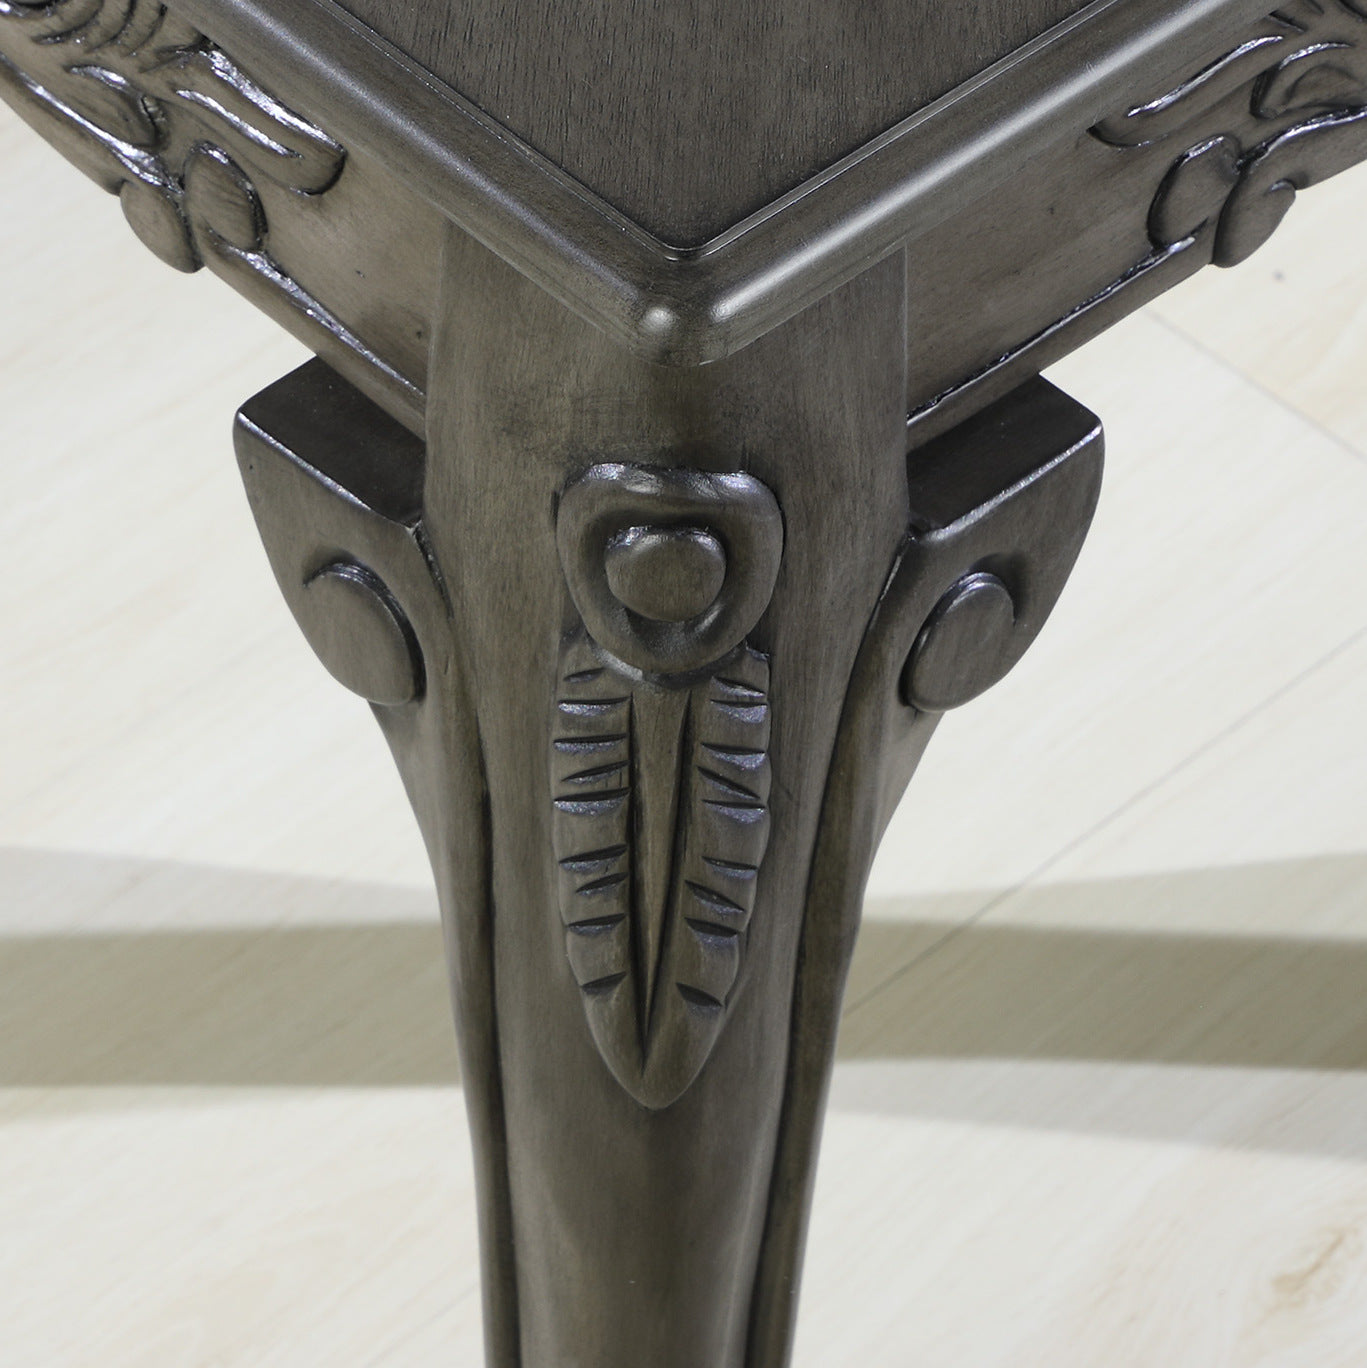 Traditional Ornate Detailing Gray Finish End Table